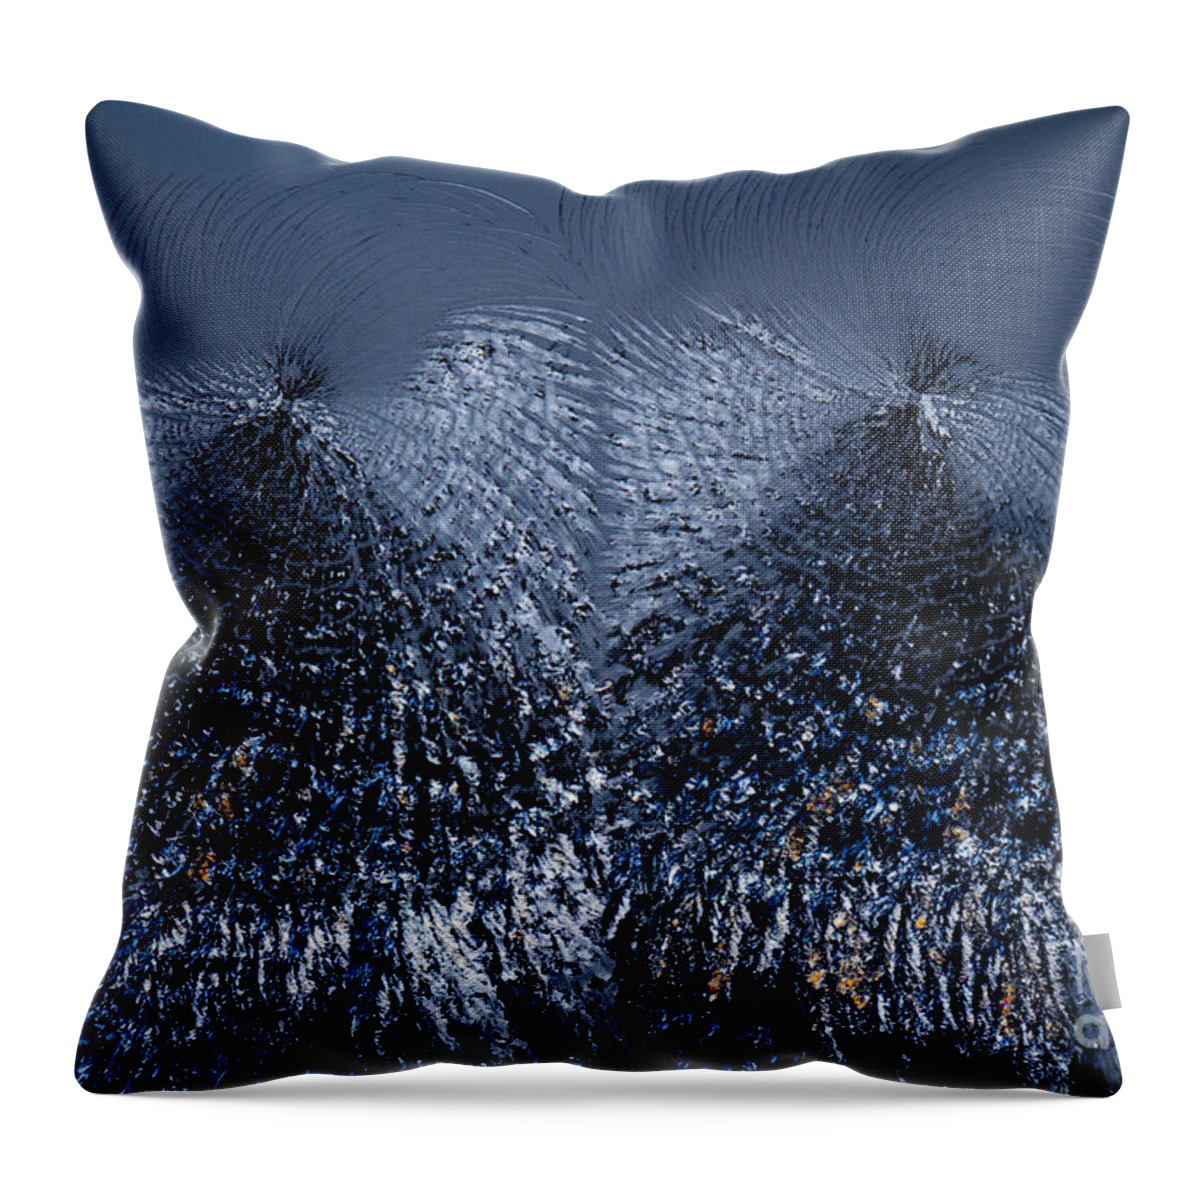 Biochemistry Throw Pillow featuring the photograph Lactose Monohydrate, Lm #2 by Antonio Romero